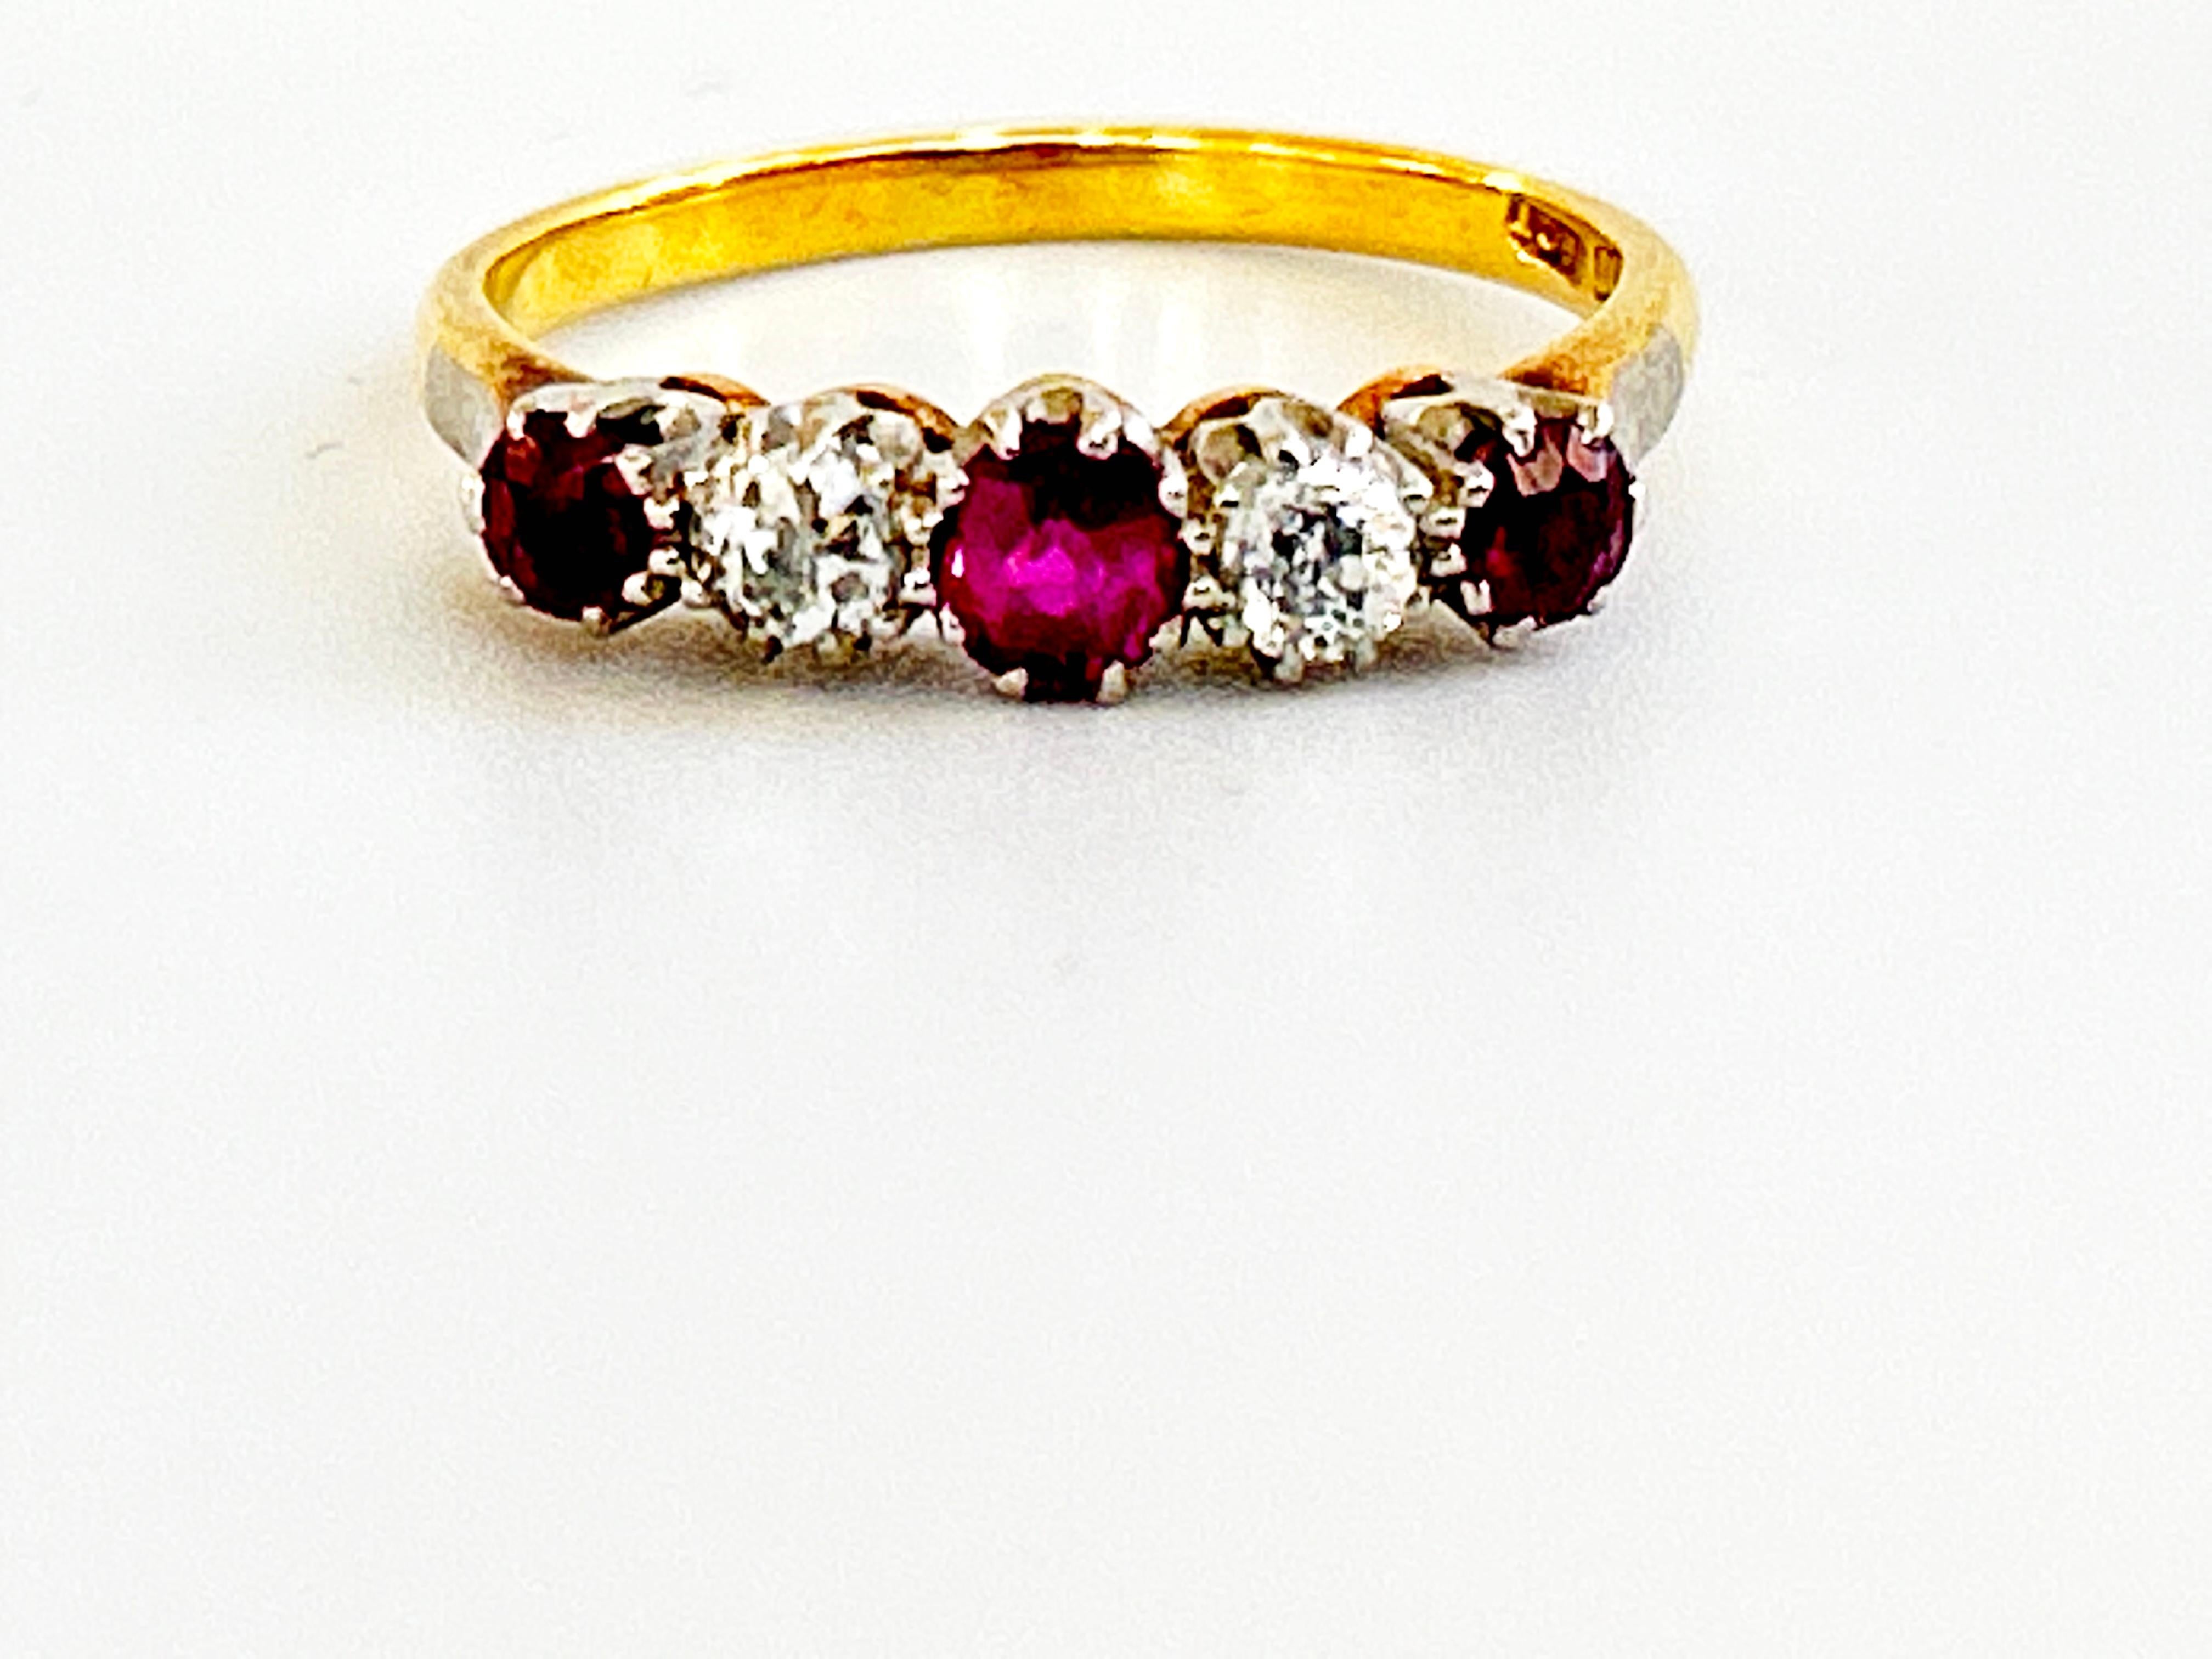 A Ruby and Diamond half hoop ring, three round faceted rubies and two old cut diamonds claw set in a yellow and white gold mount ring.shank marked 18ct. Plat, gross weight 3.4g.
Diamonds: Color is G-I, Clarity I -I2
Measurements: Center Ruby 4.02mm